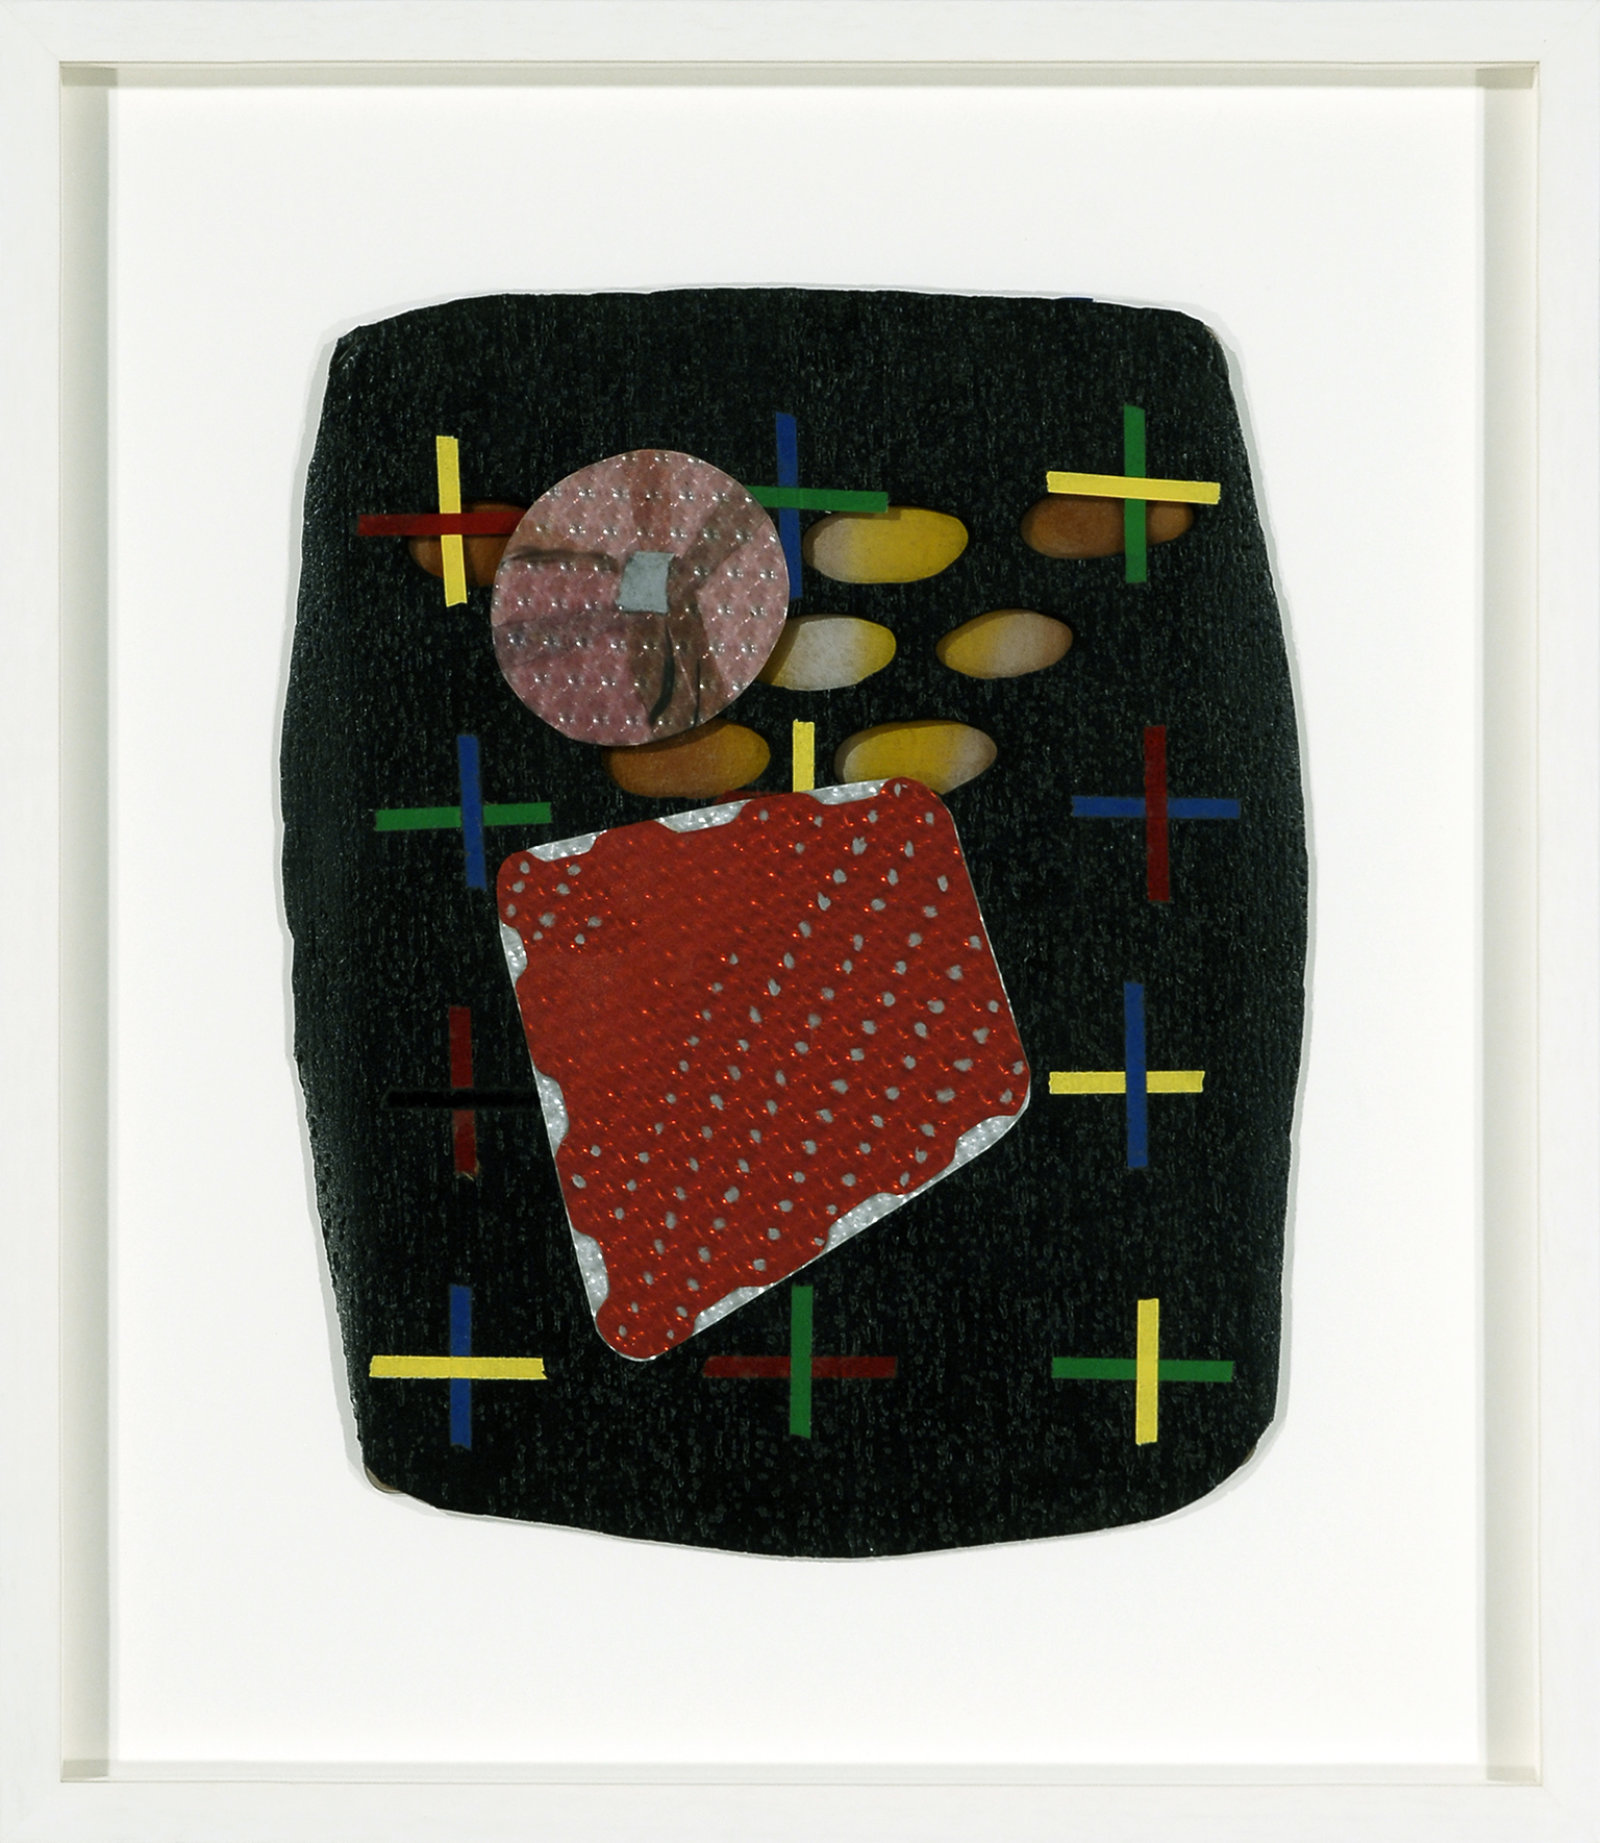 Jerry Pethick, Lenticular Register, 1973, rubber, tile, tape, rolux, 22 x 20 in. (57 x 50 cm)